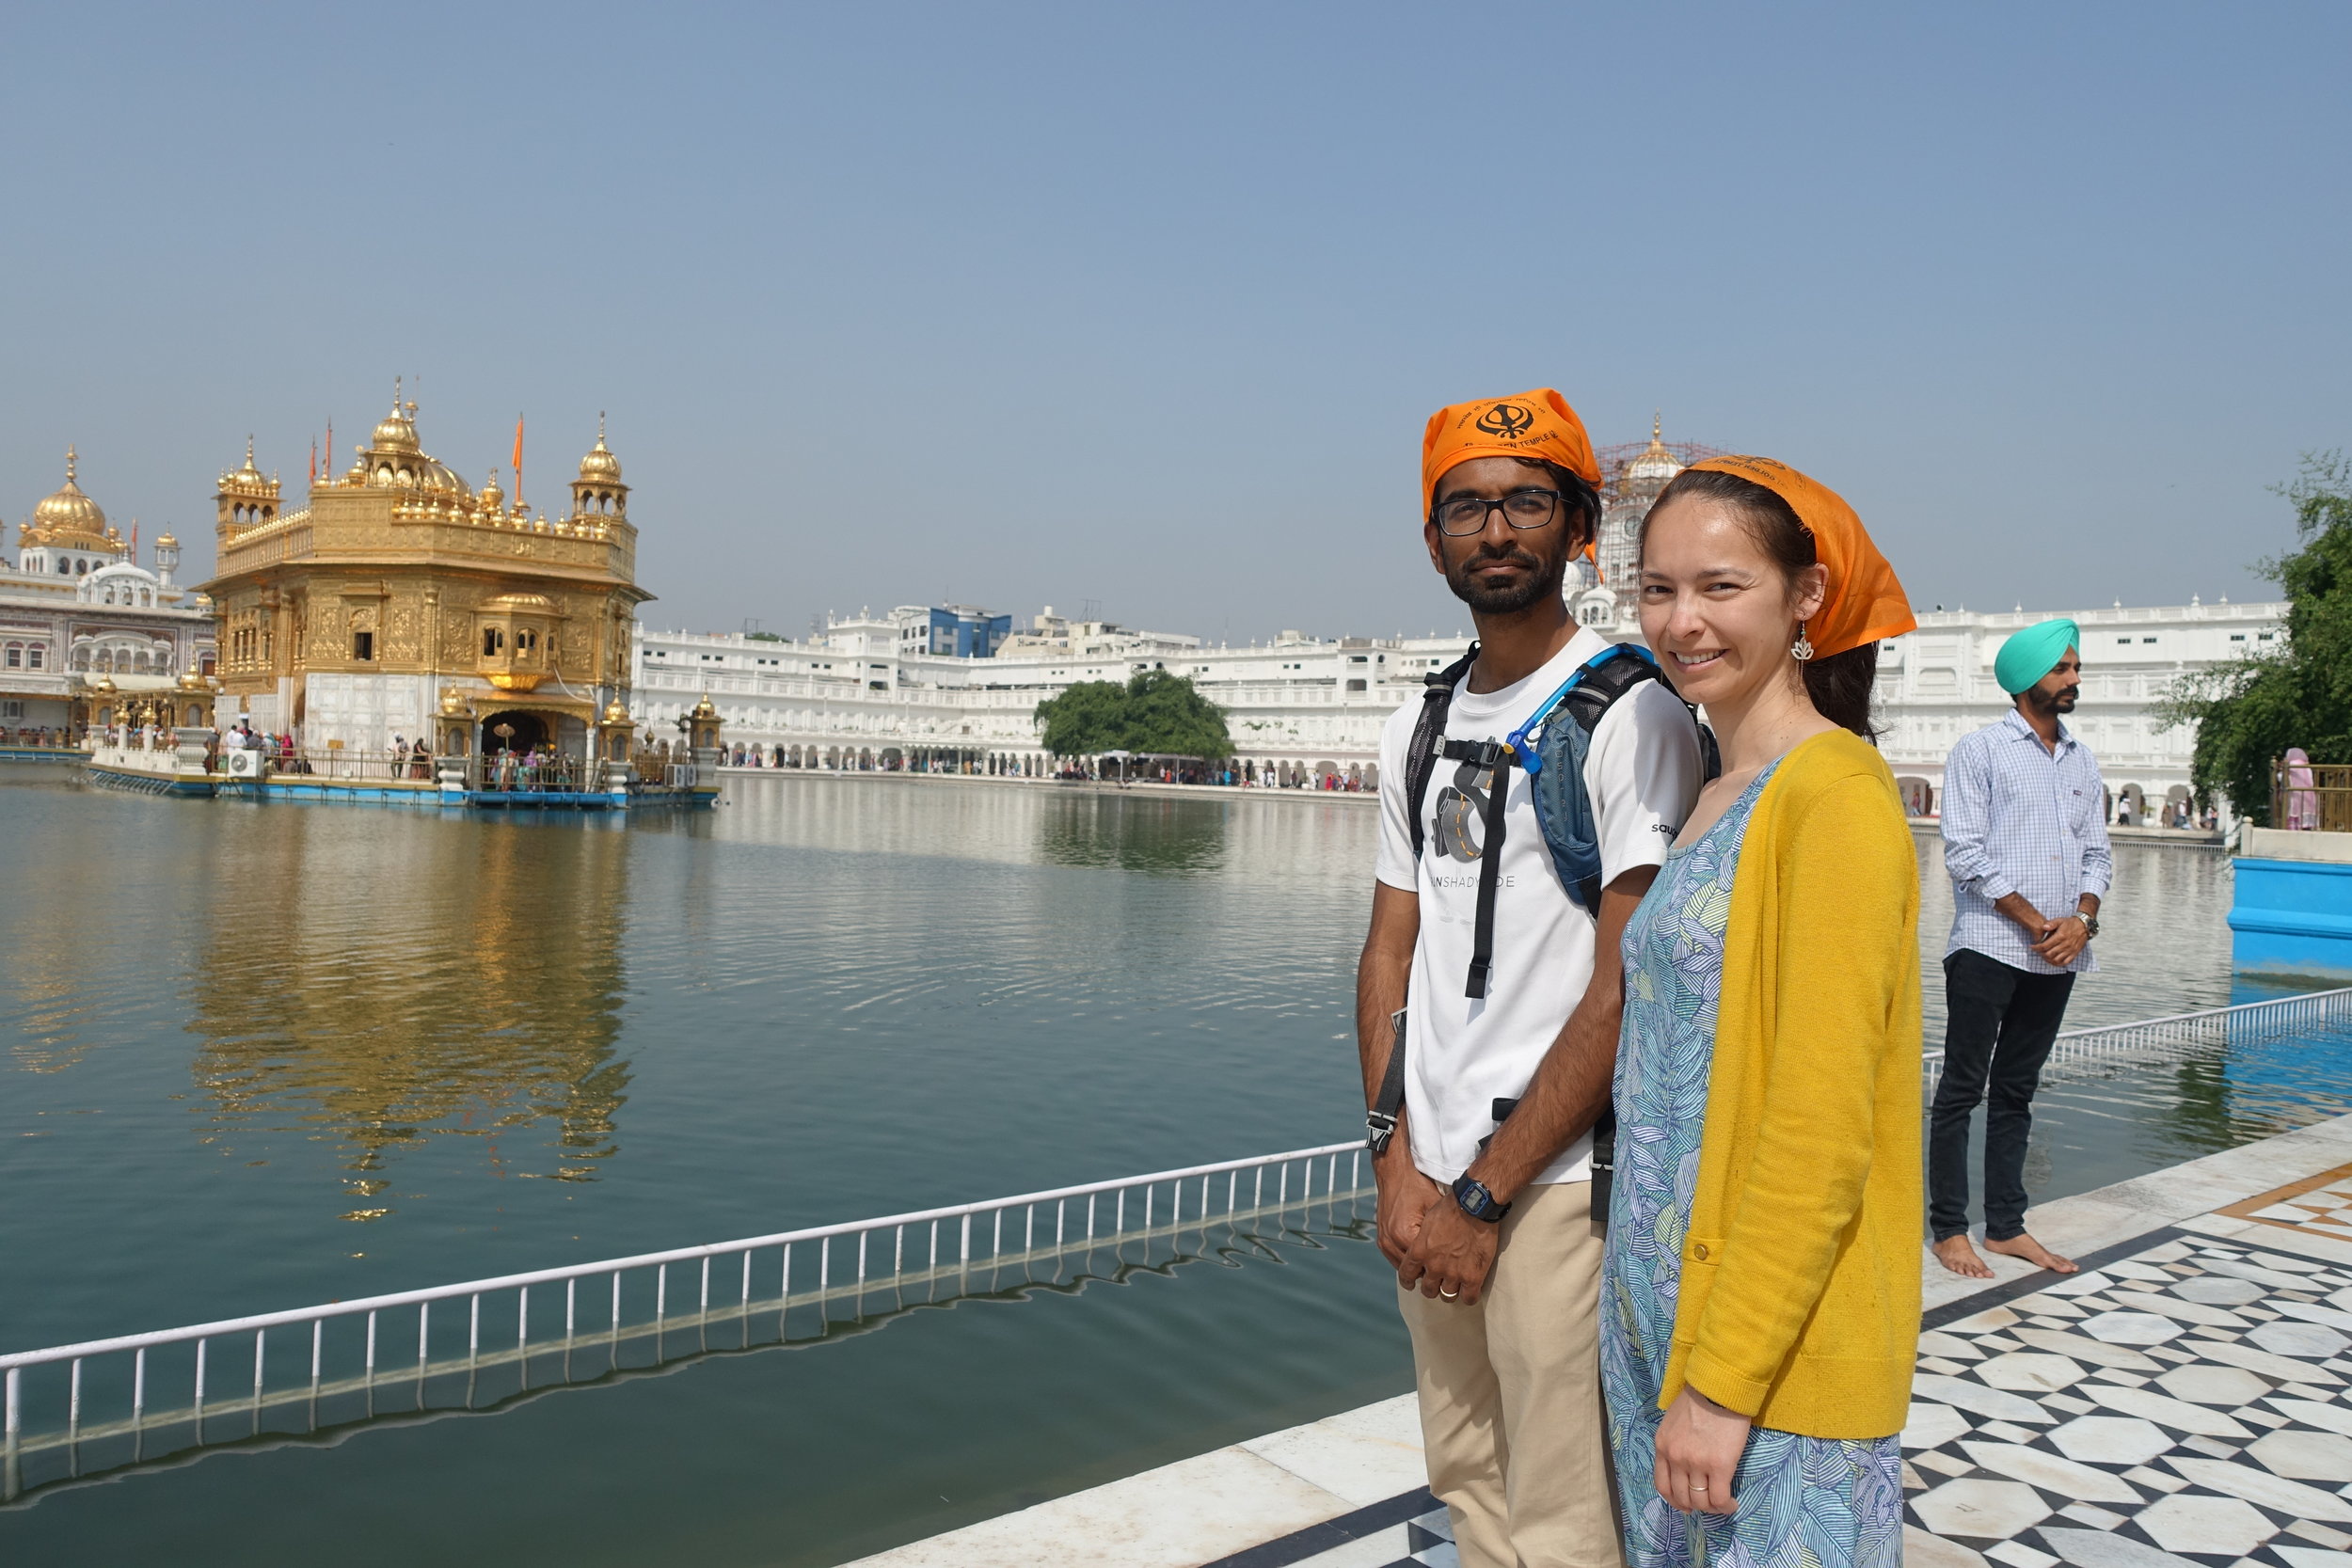  At the Golden Temple, one should cover their head and not show their back to the temple, which makes for slightly awkward photos. Alas. 